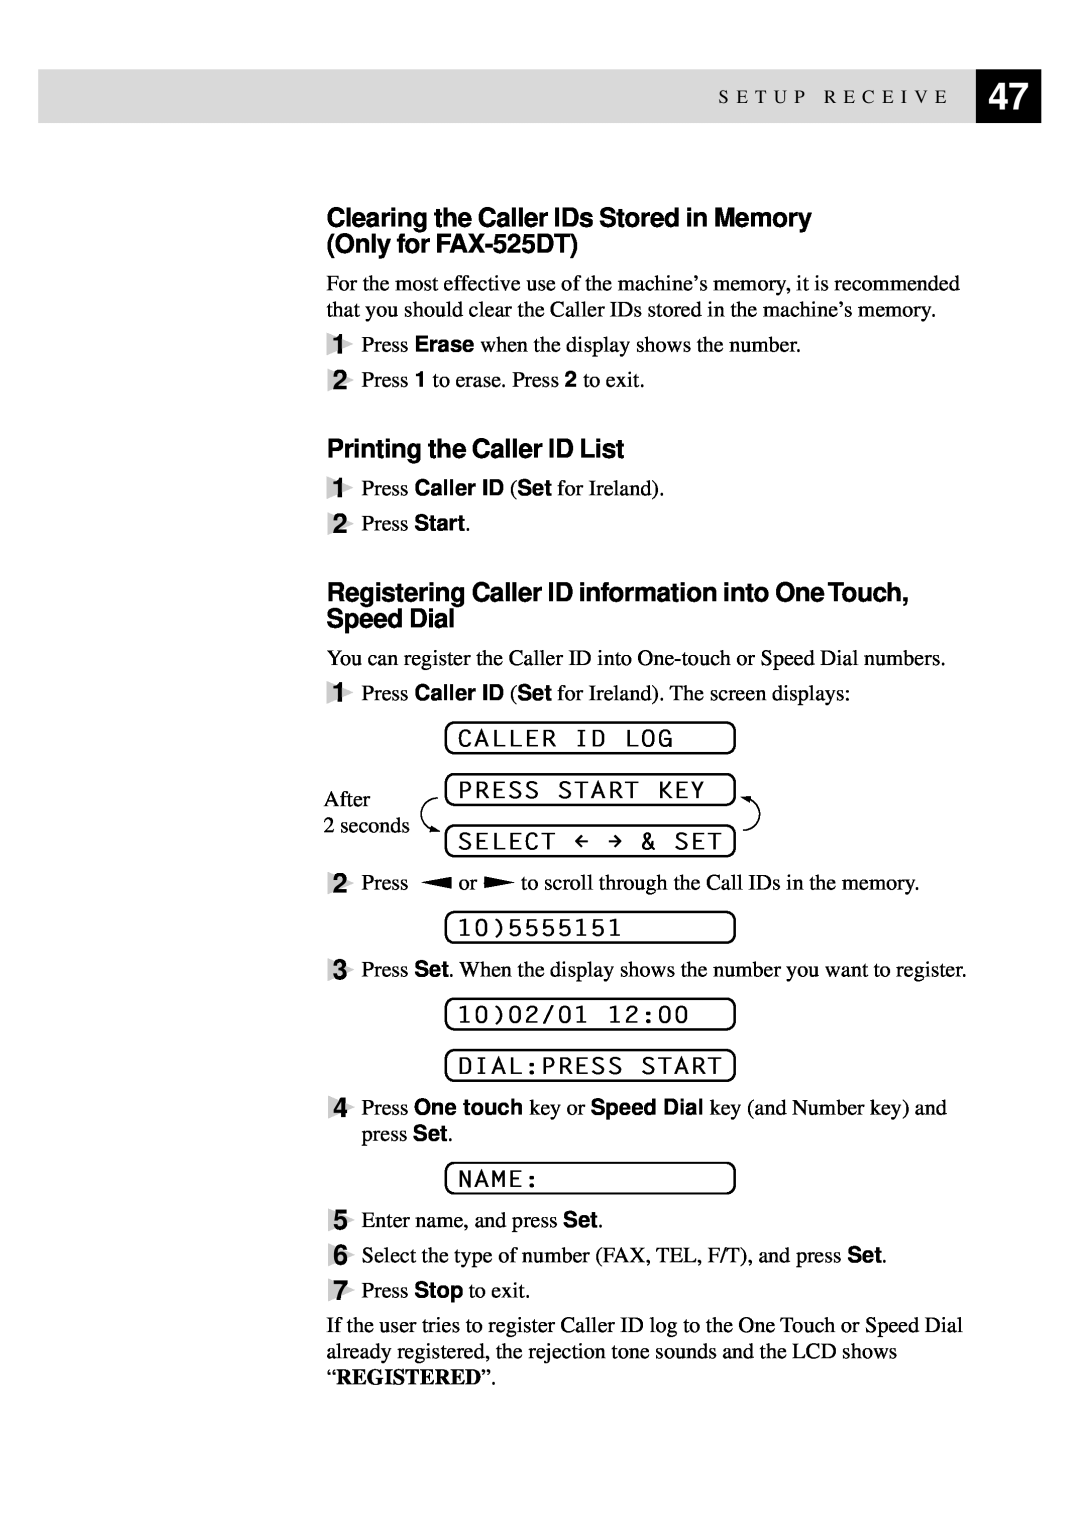 Brother 515 Clearing the Caller IDs Stored in Memory Only for FAX-525DT, Printing the Caller ID List, Caller Id Log, Name 